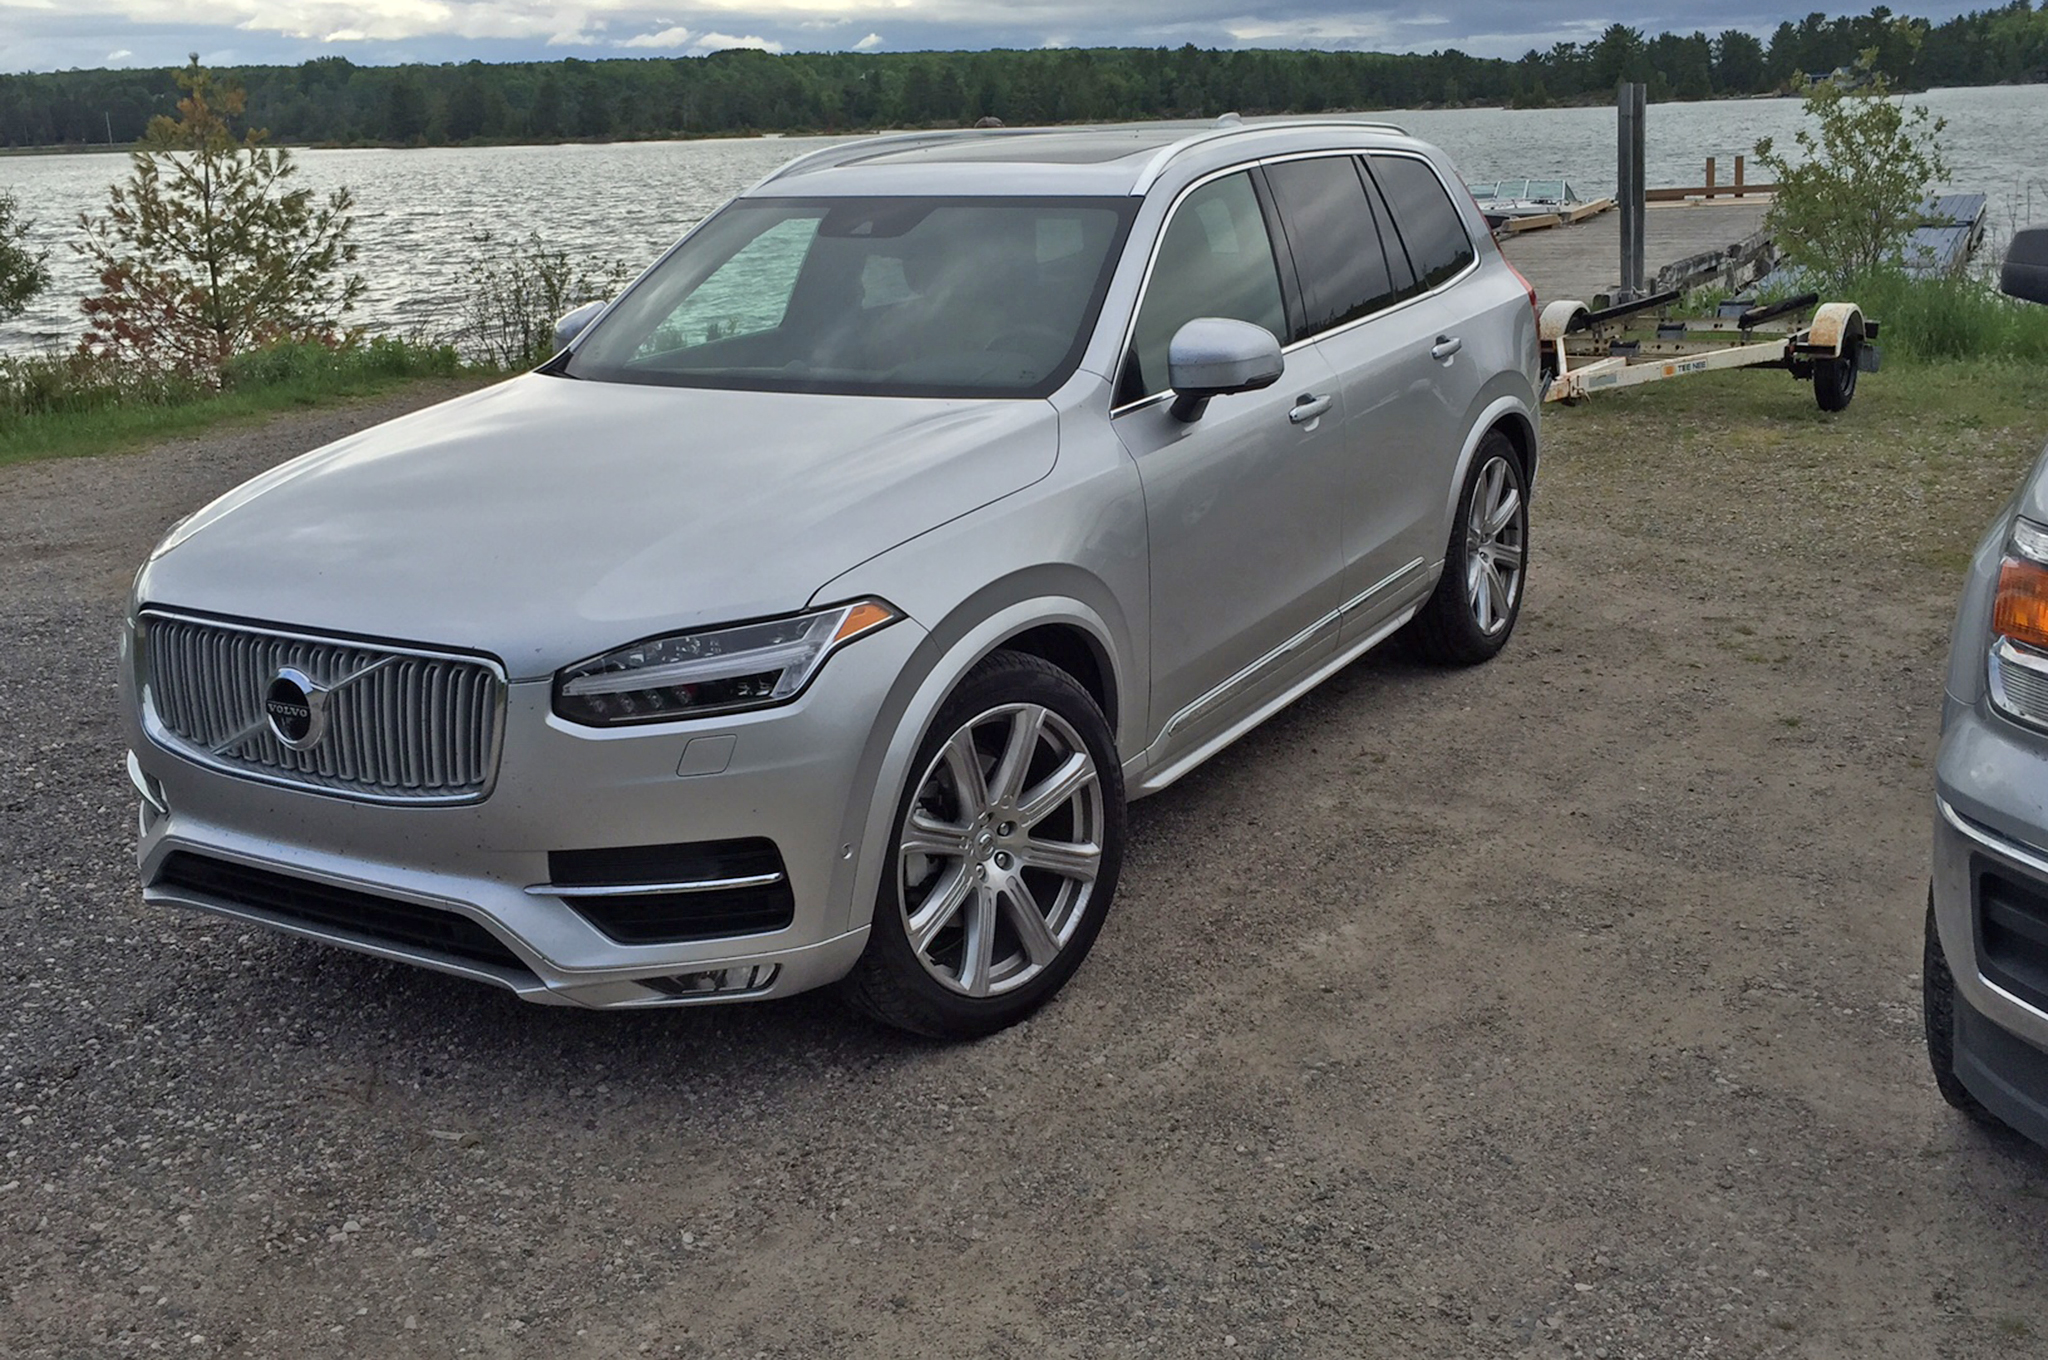 the 2016 Volvo XC90 T6 AWD